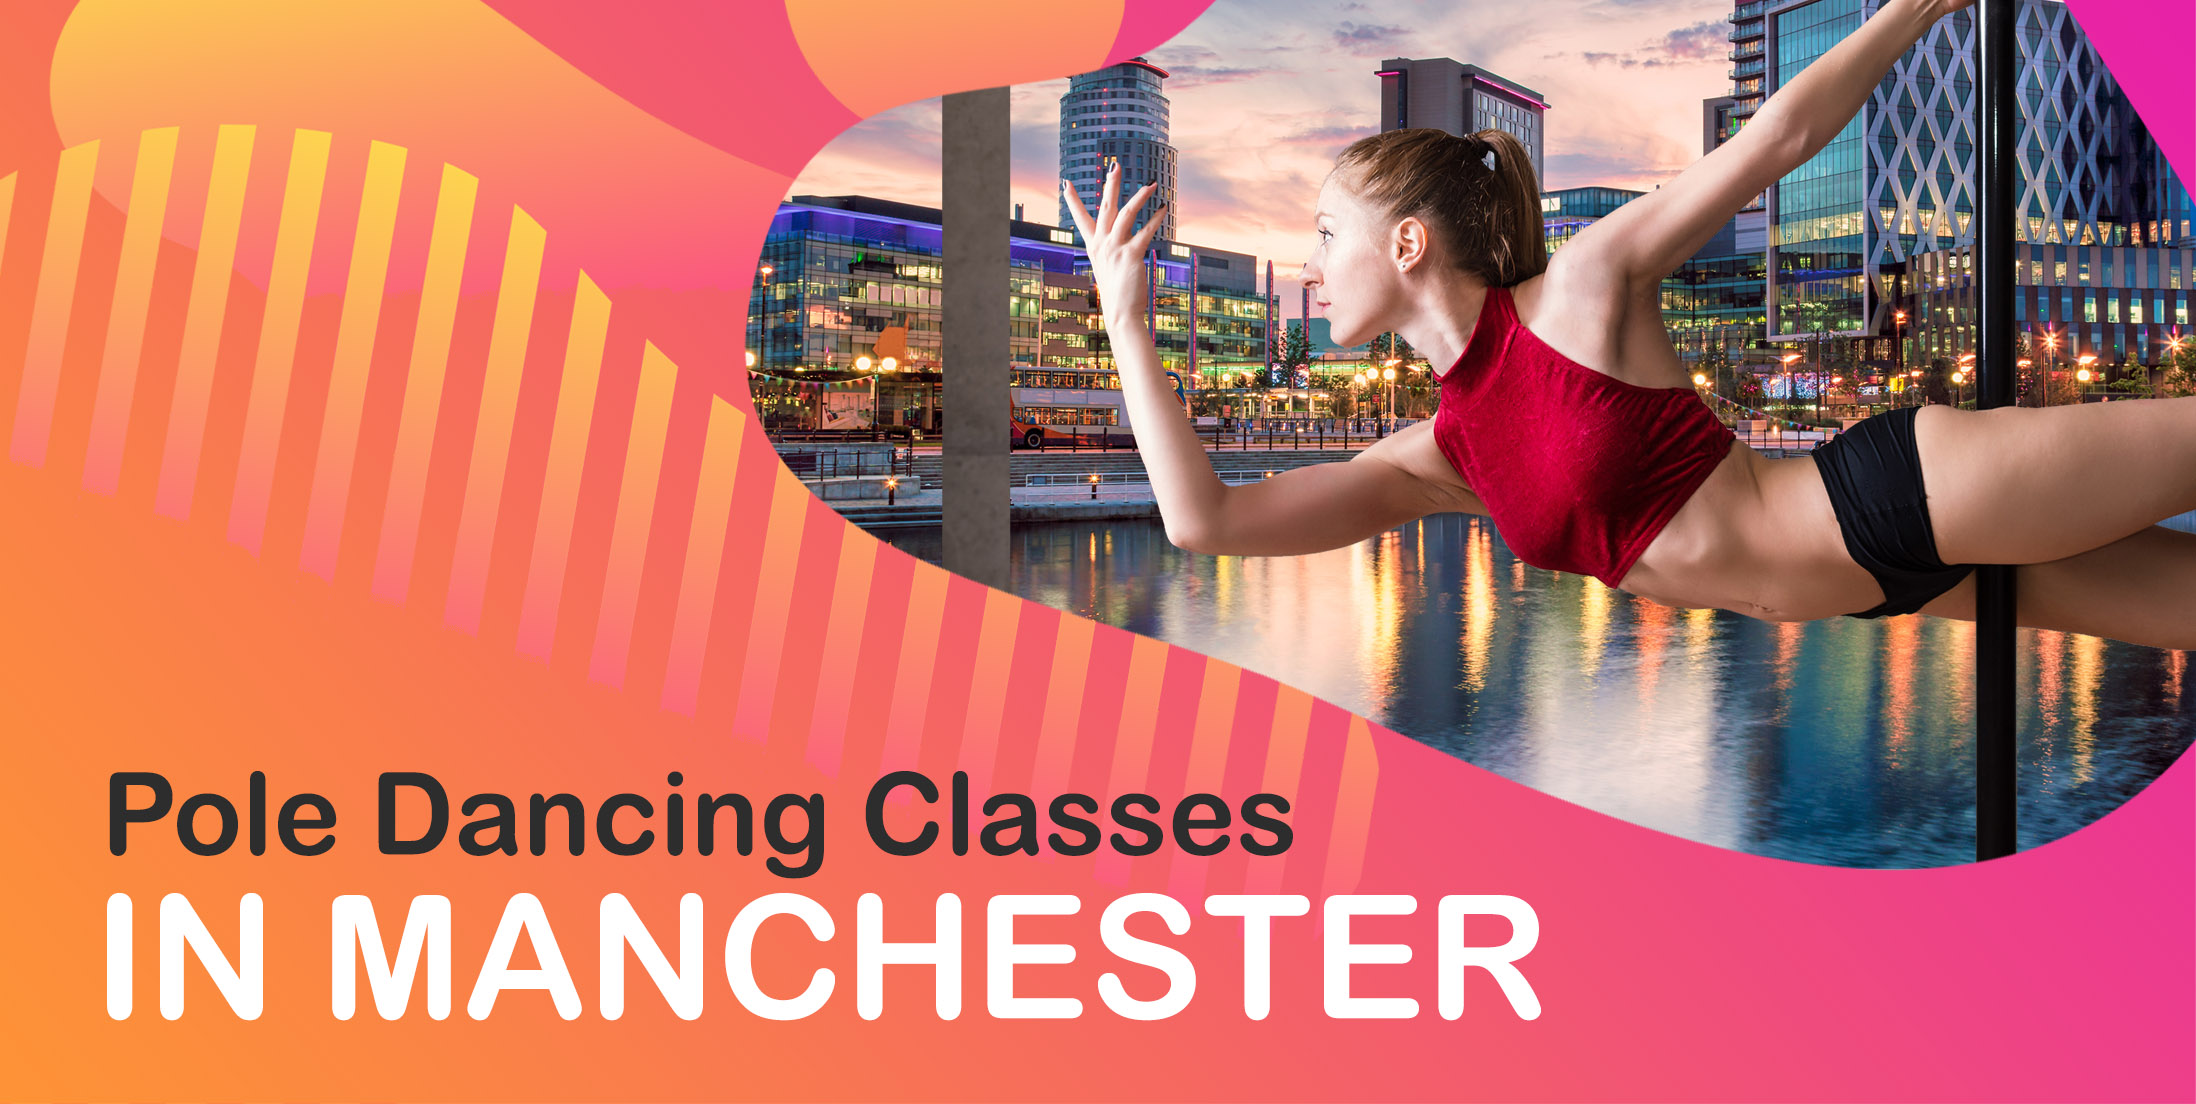 Pole Dancing Classes in Manchester